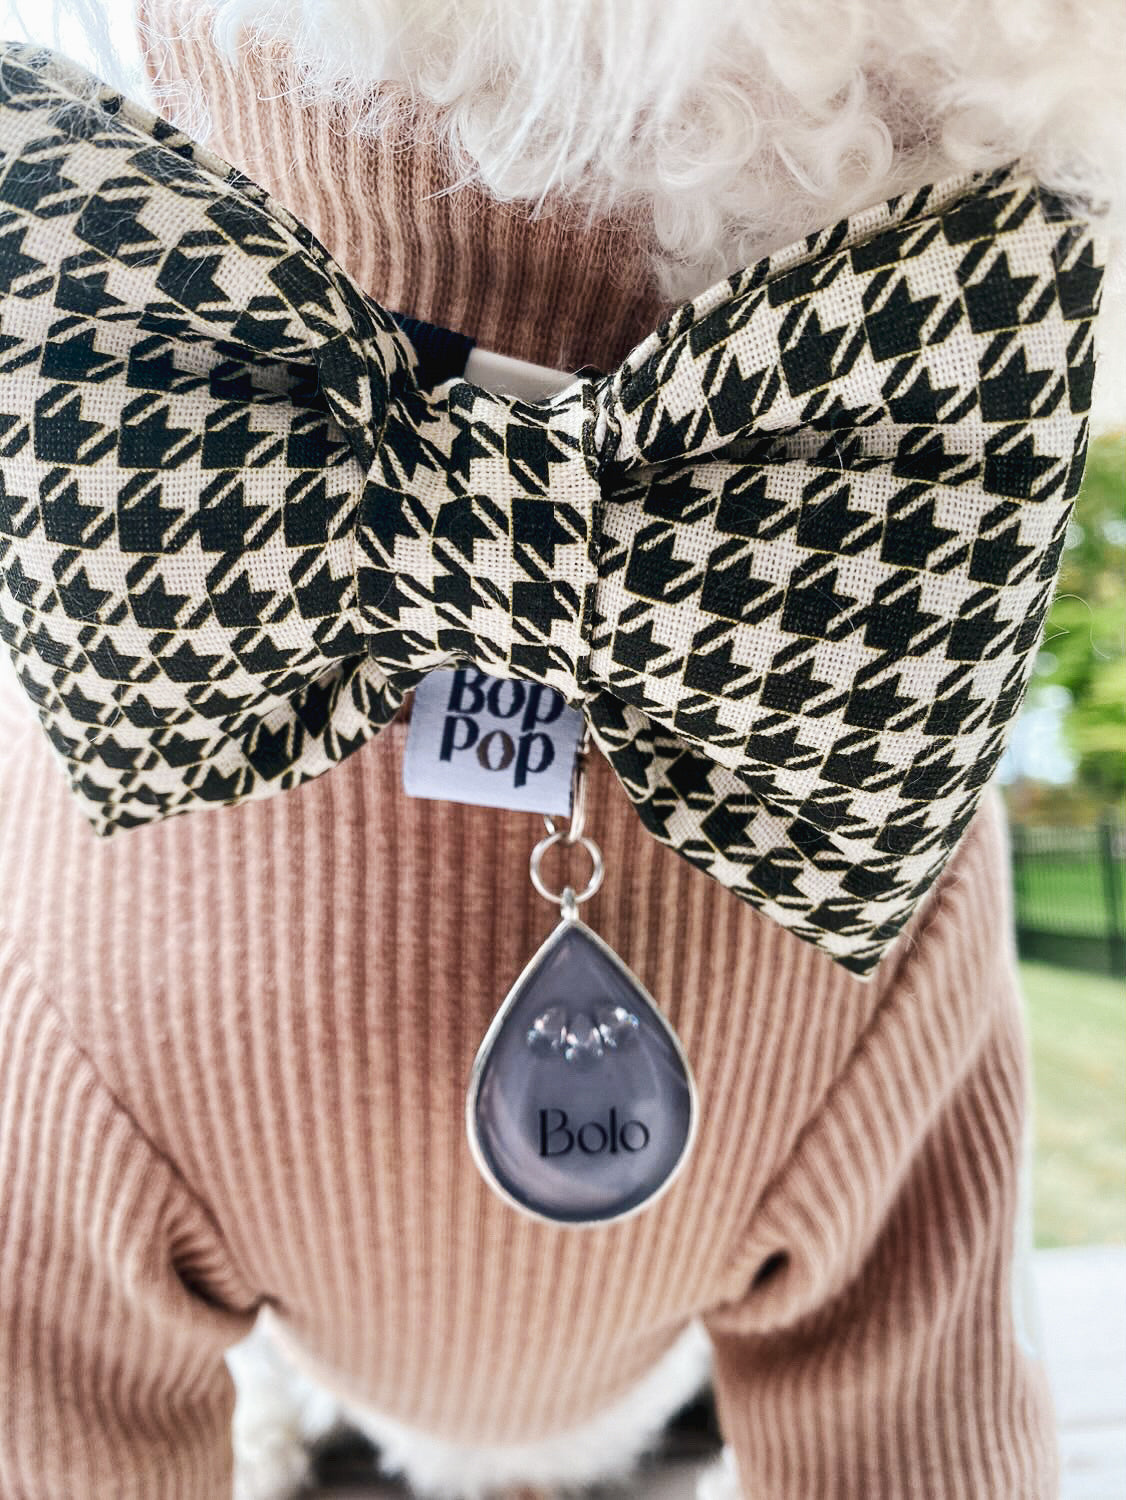 hounds tooth mini bow tie dog cat pet accessory Bop Pop Pets Cotton black and white handmade 